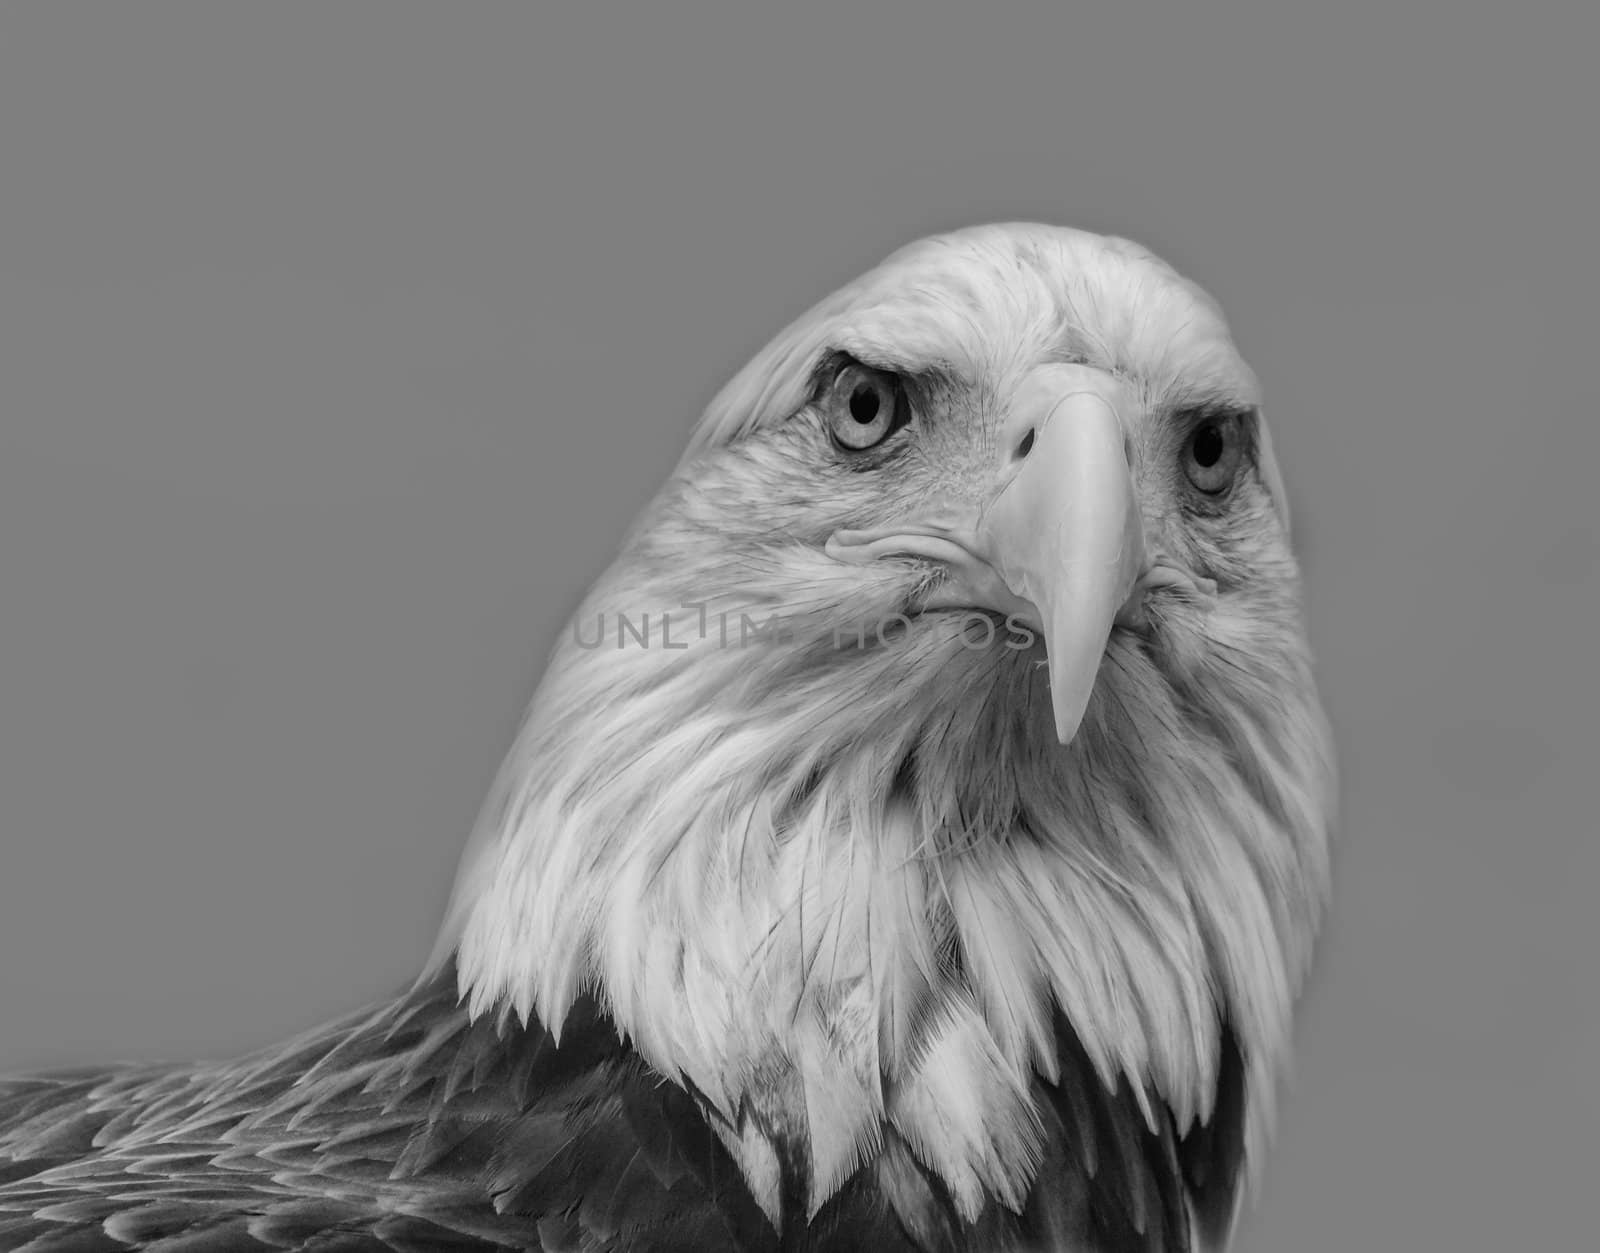 American Bald Eagle by wolterk